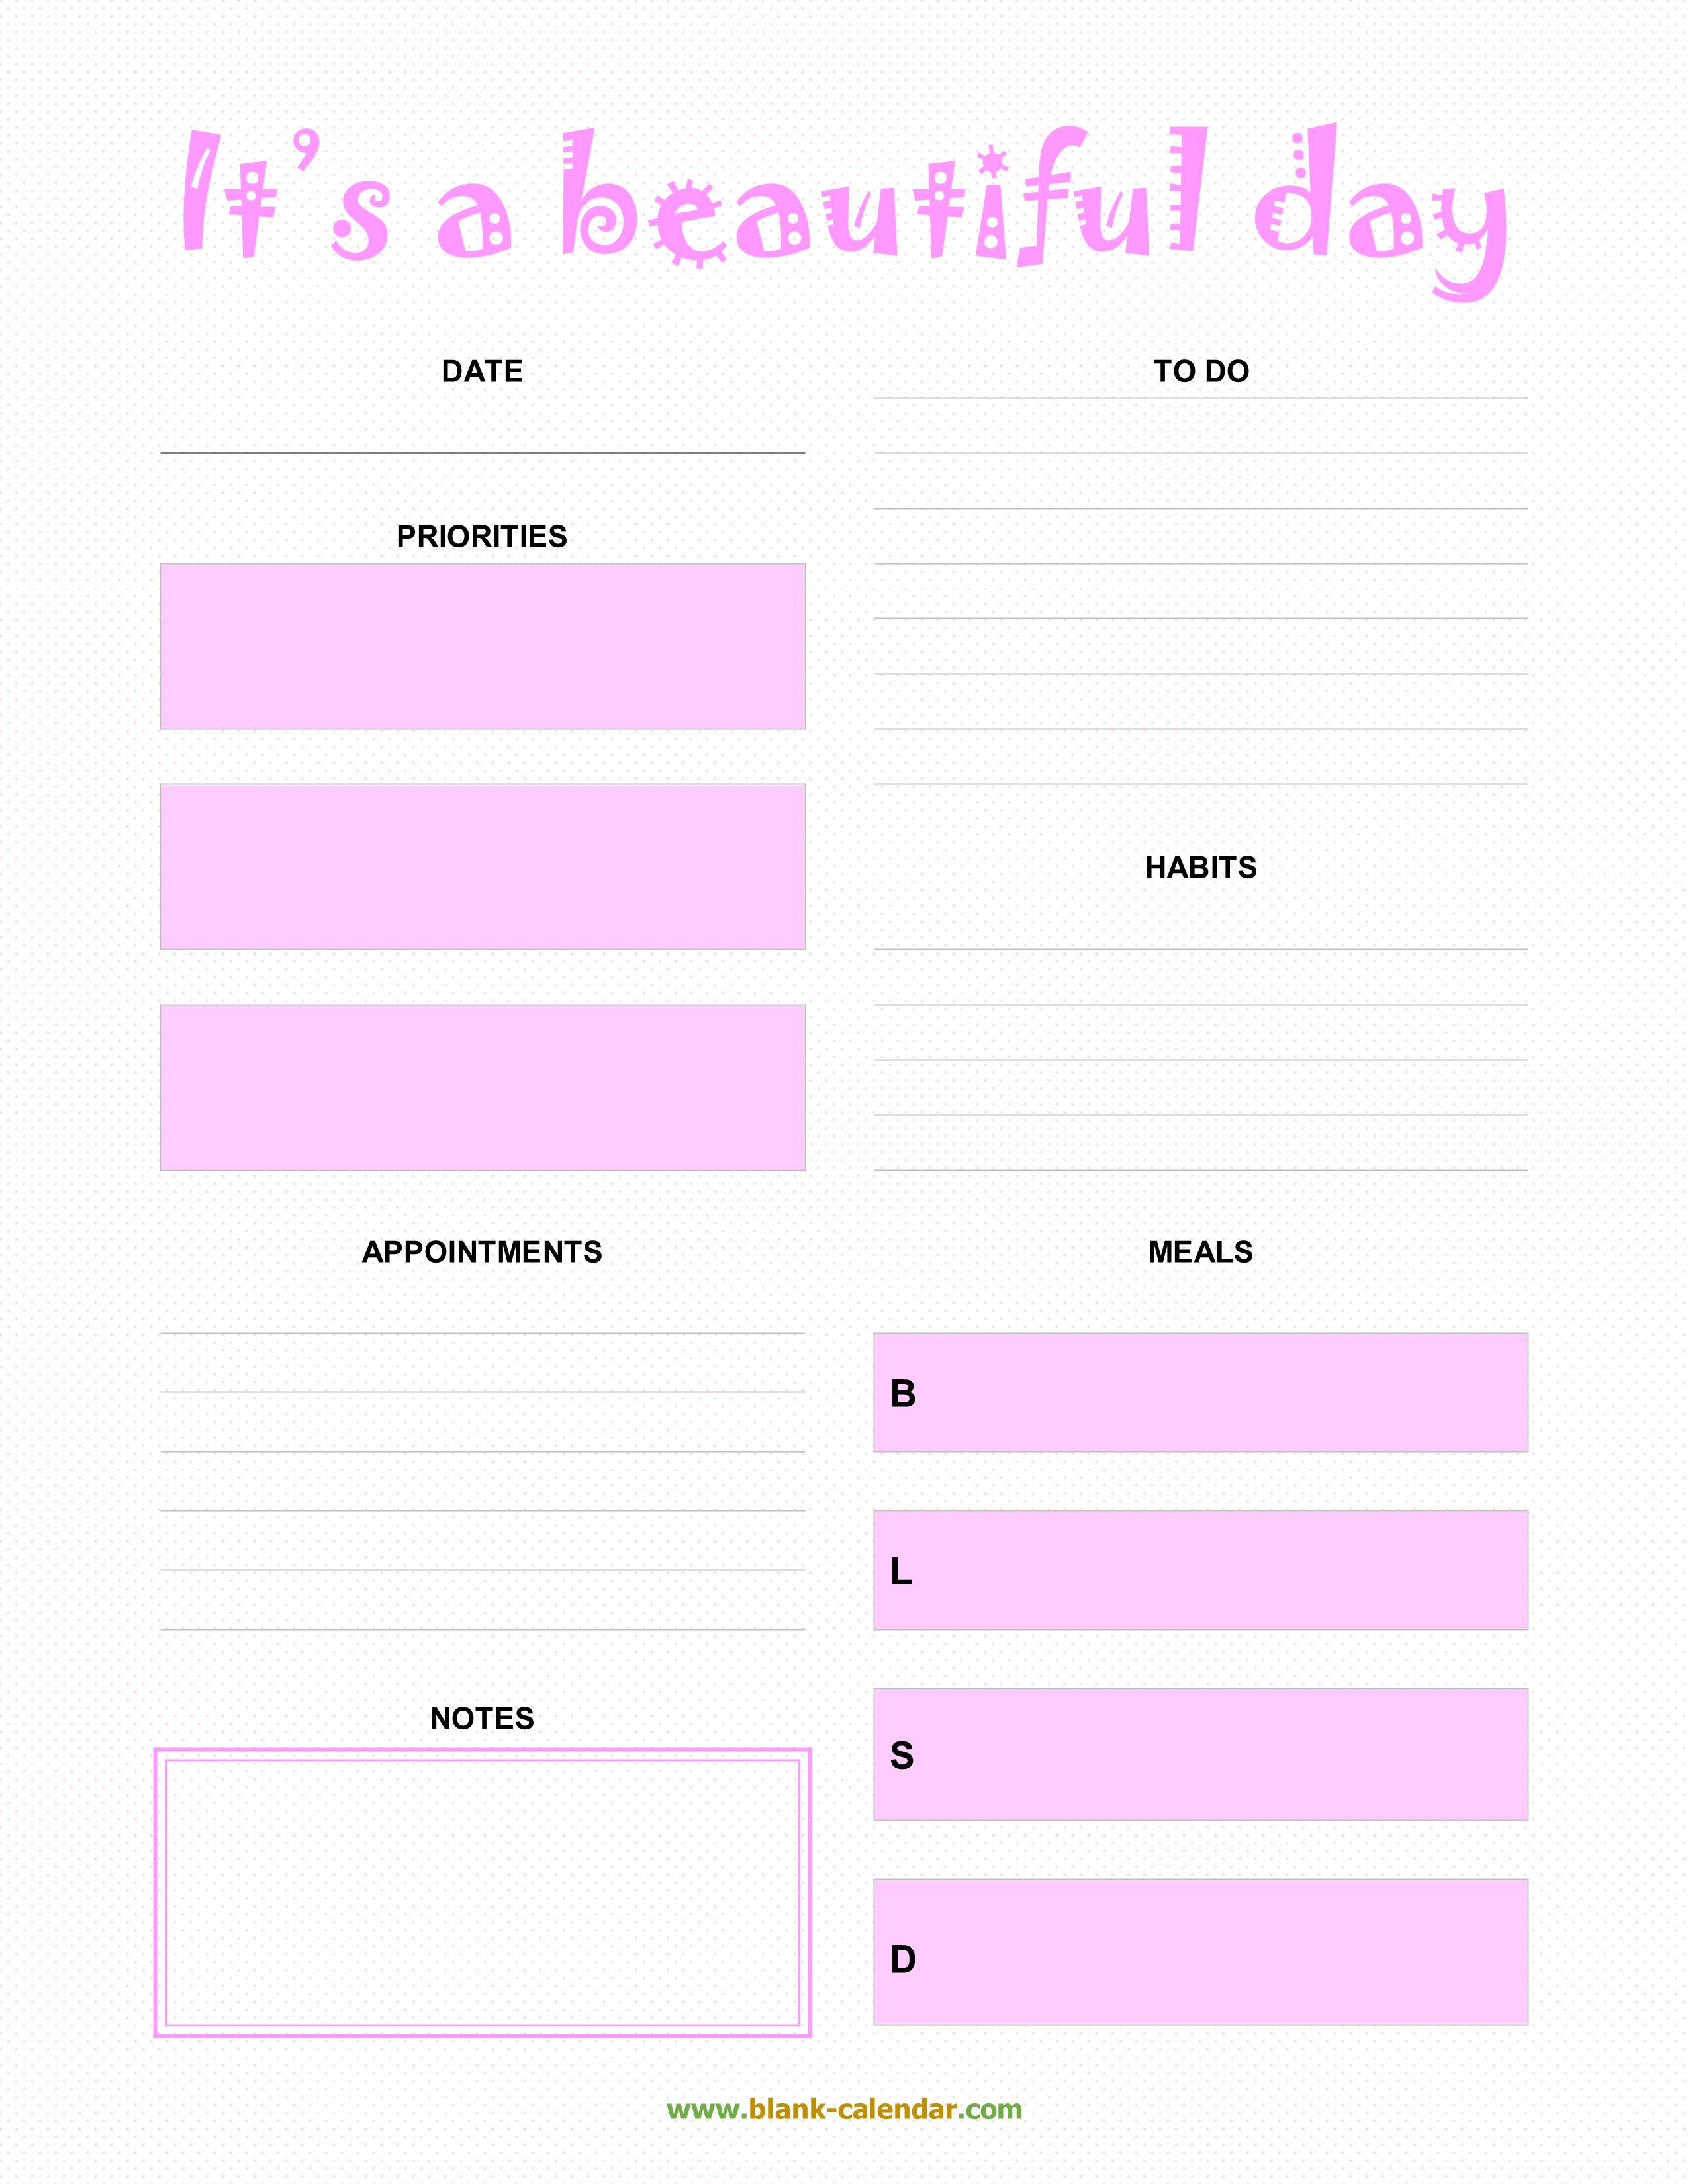 Daily Planner Templates (WORD, EXCEL, PDF)